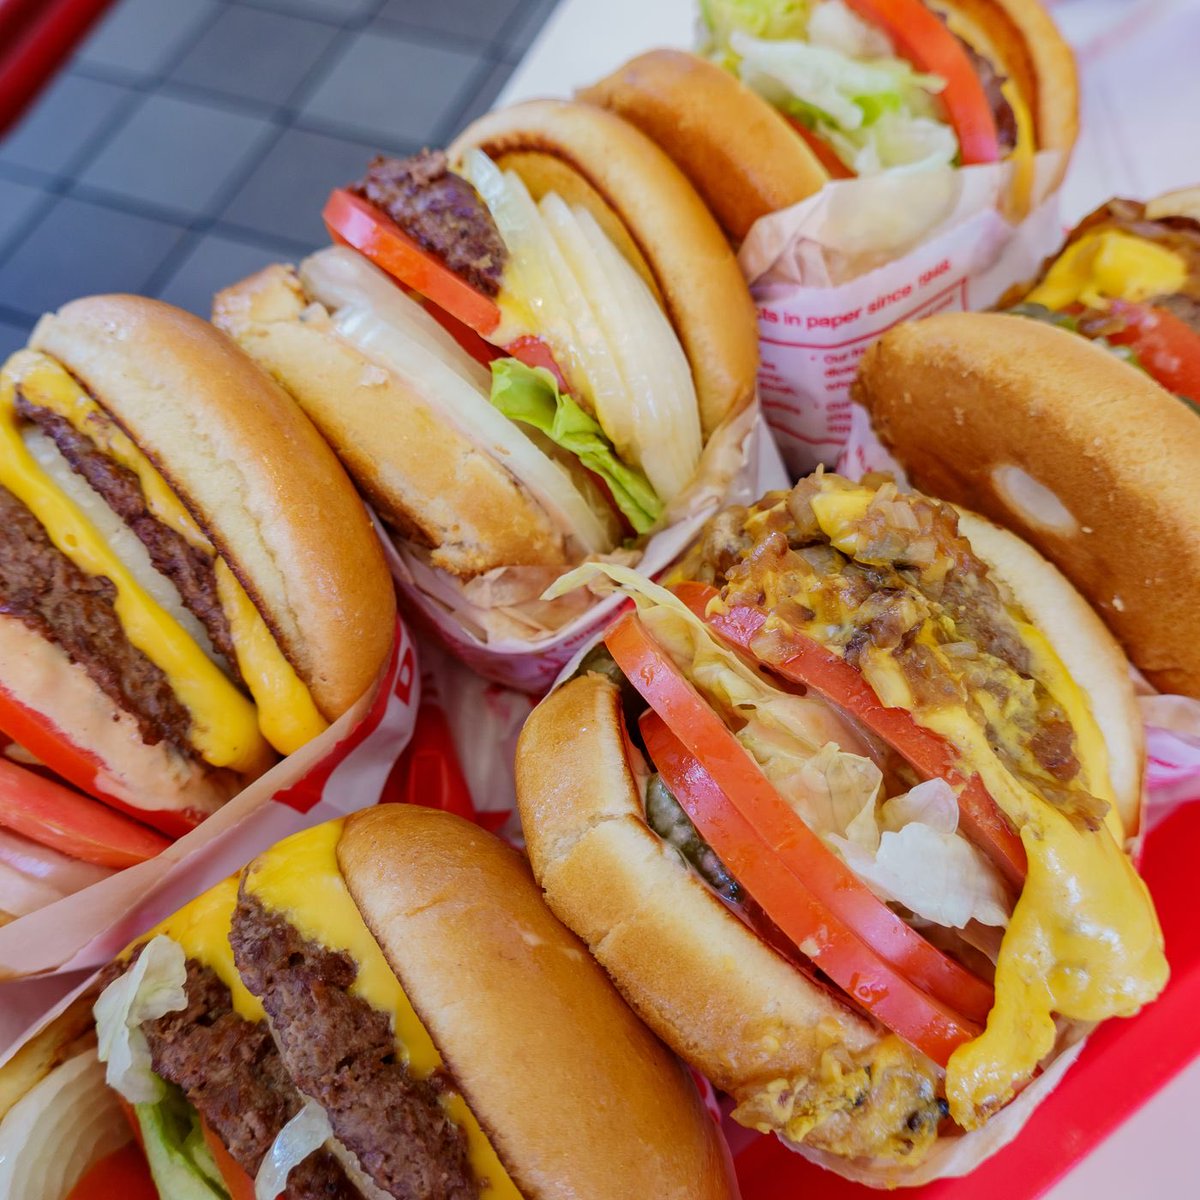 Okay, now think fast food. What’s your go to?